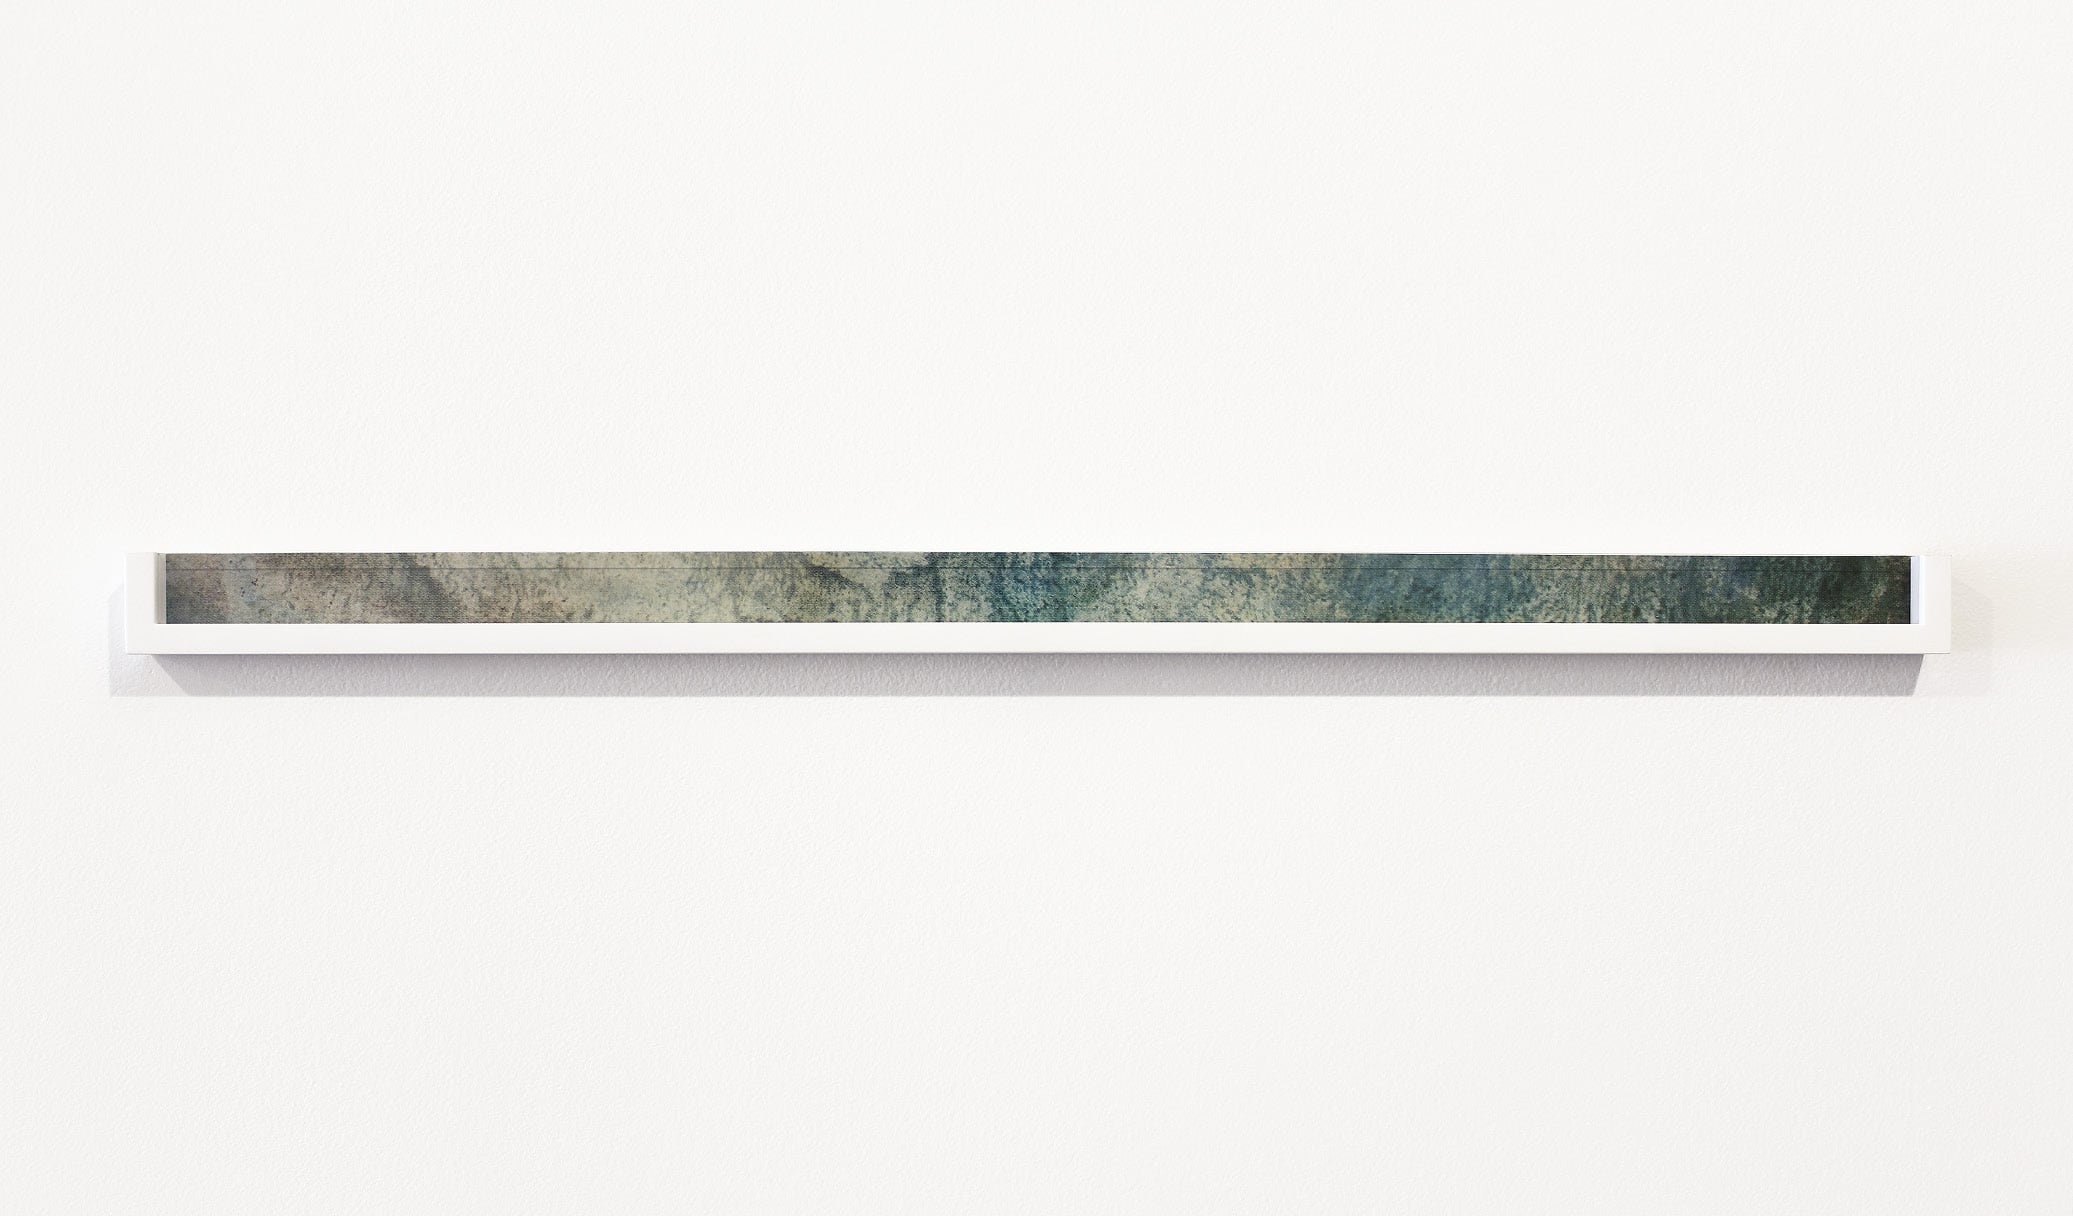 Joshua Petherick, Gutter 2013, glass, c-print, lacquer, board, wood, image courtesy of the artist and Croy Nielsen Galerie, Berlin